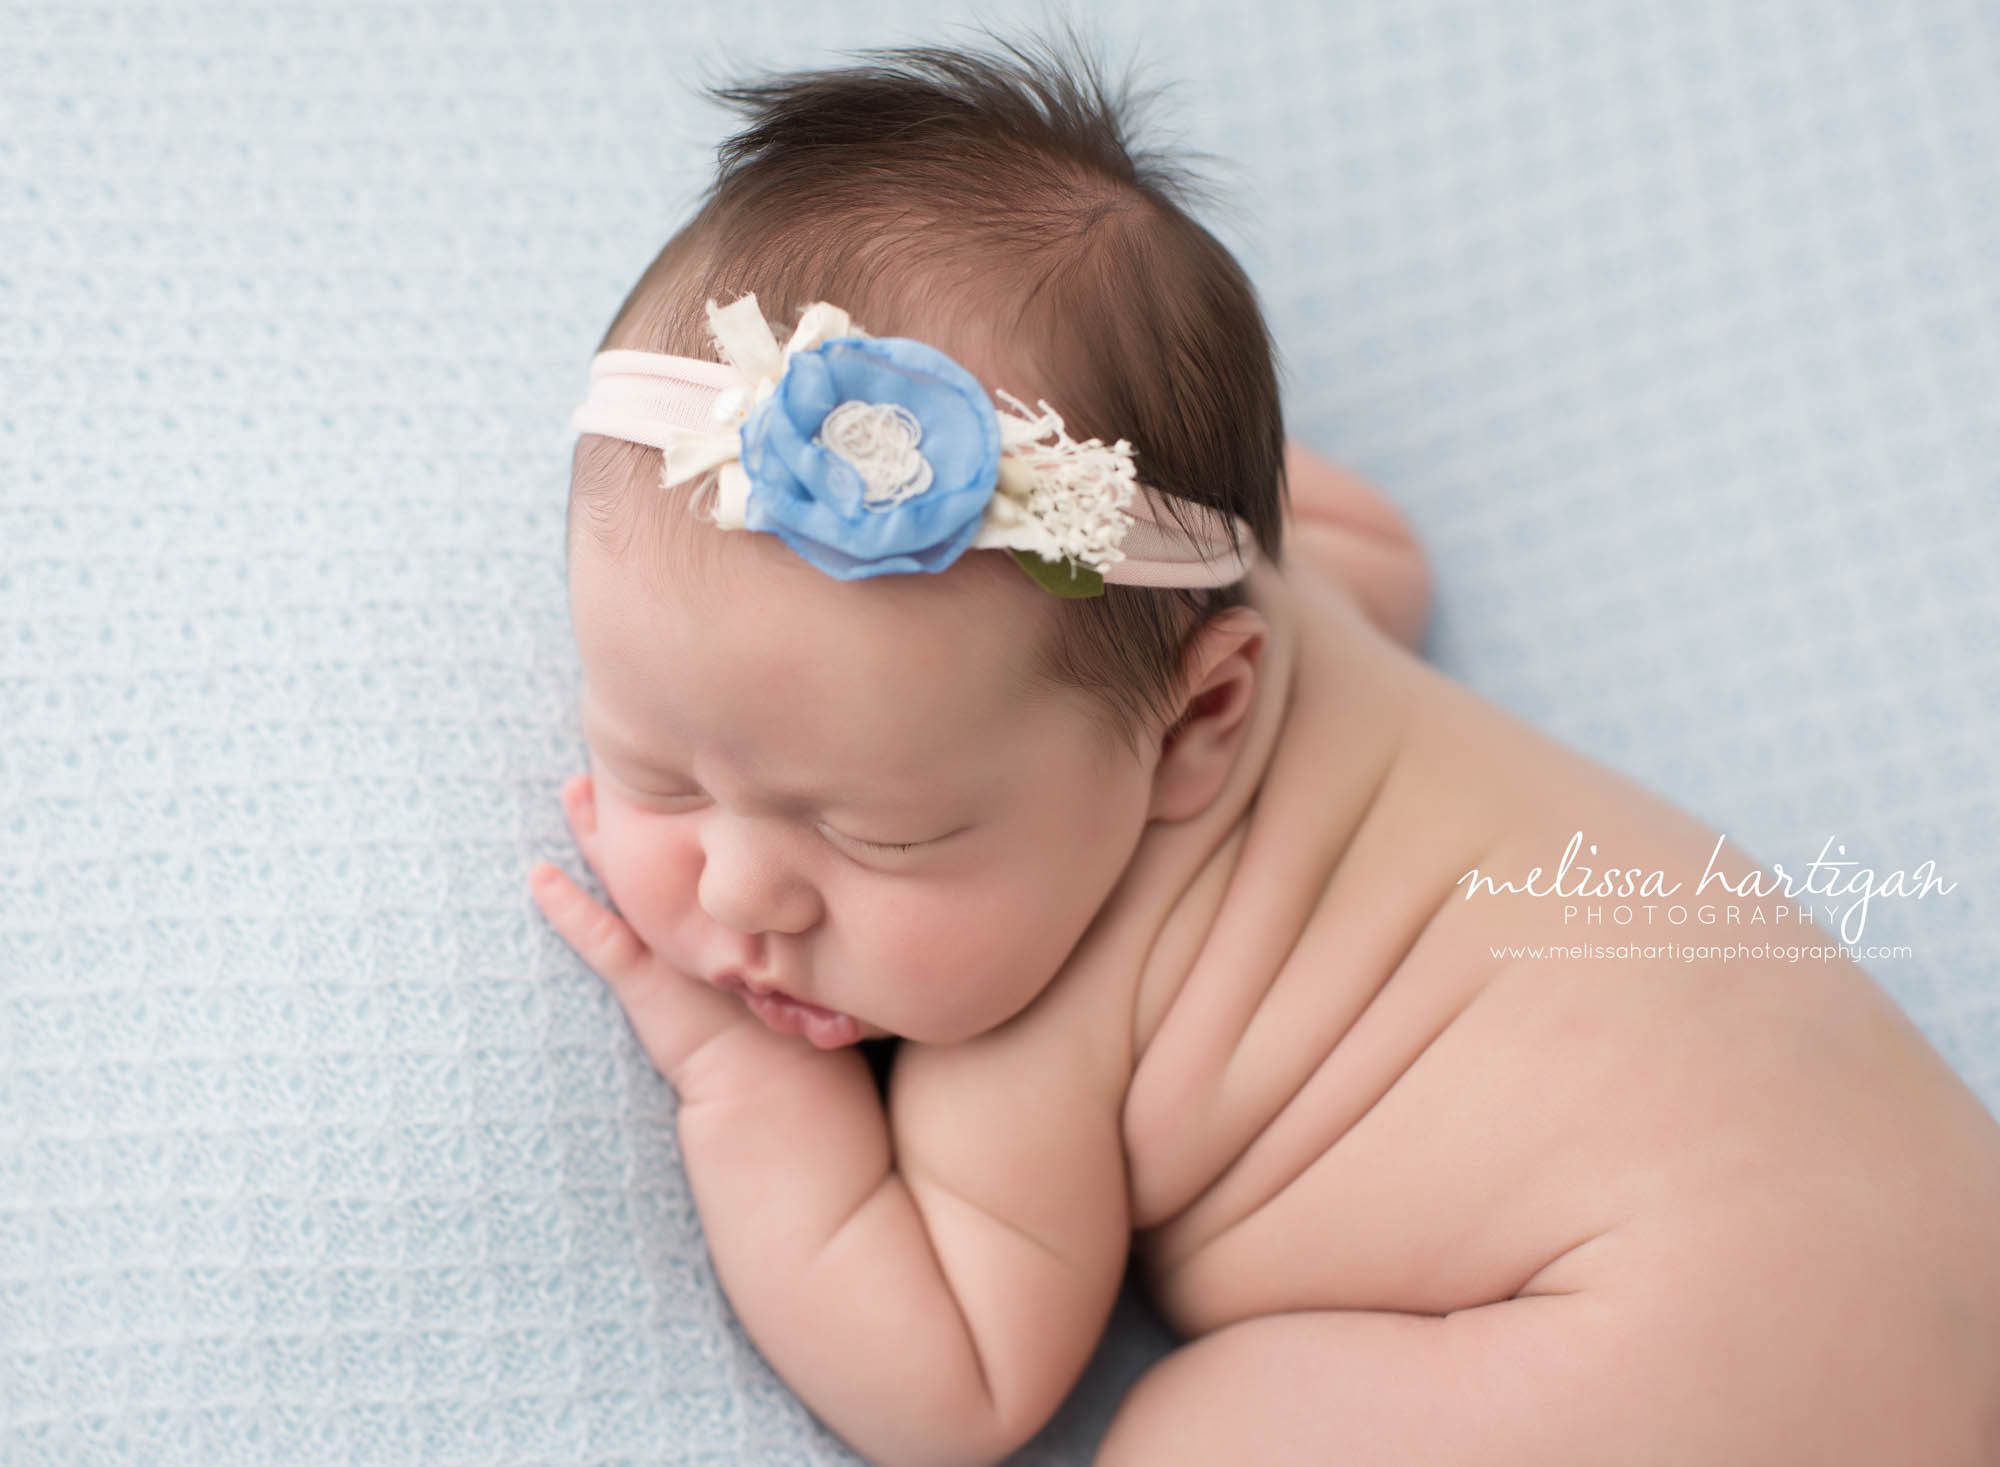 Melissa Hartigan Photography Connecticut Newborn Photographer Coventry Ct Middlefield CT baby Fairfield county Newborn and maternity photography Baby girl blue floral headband sleeping on light blue blanket